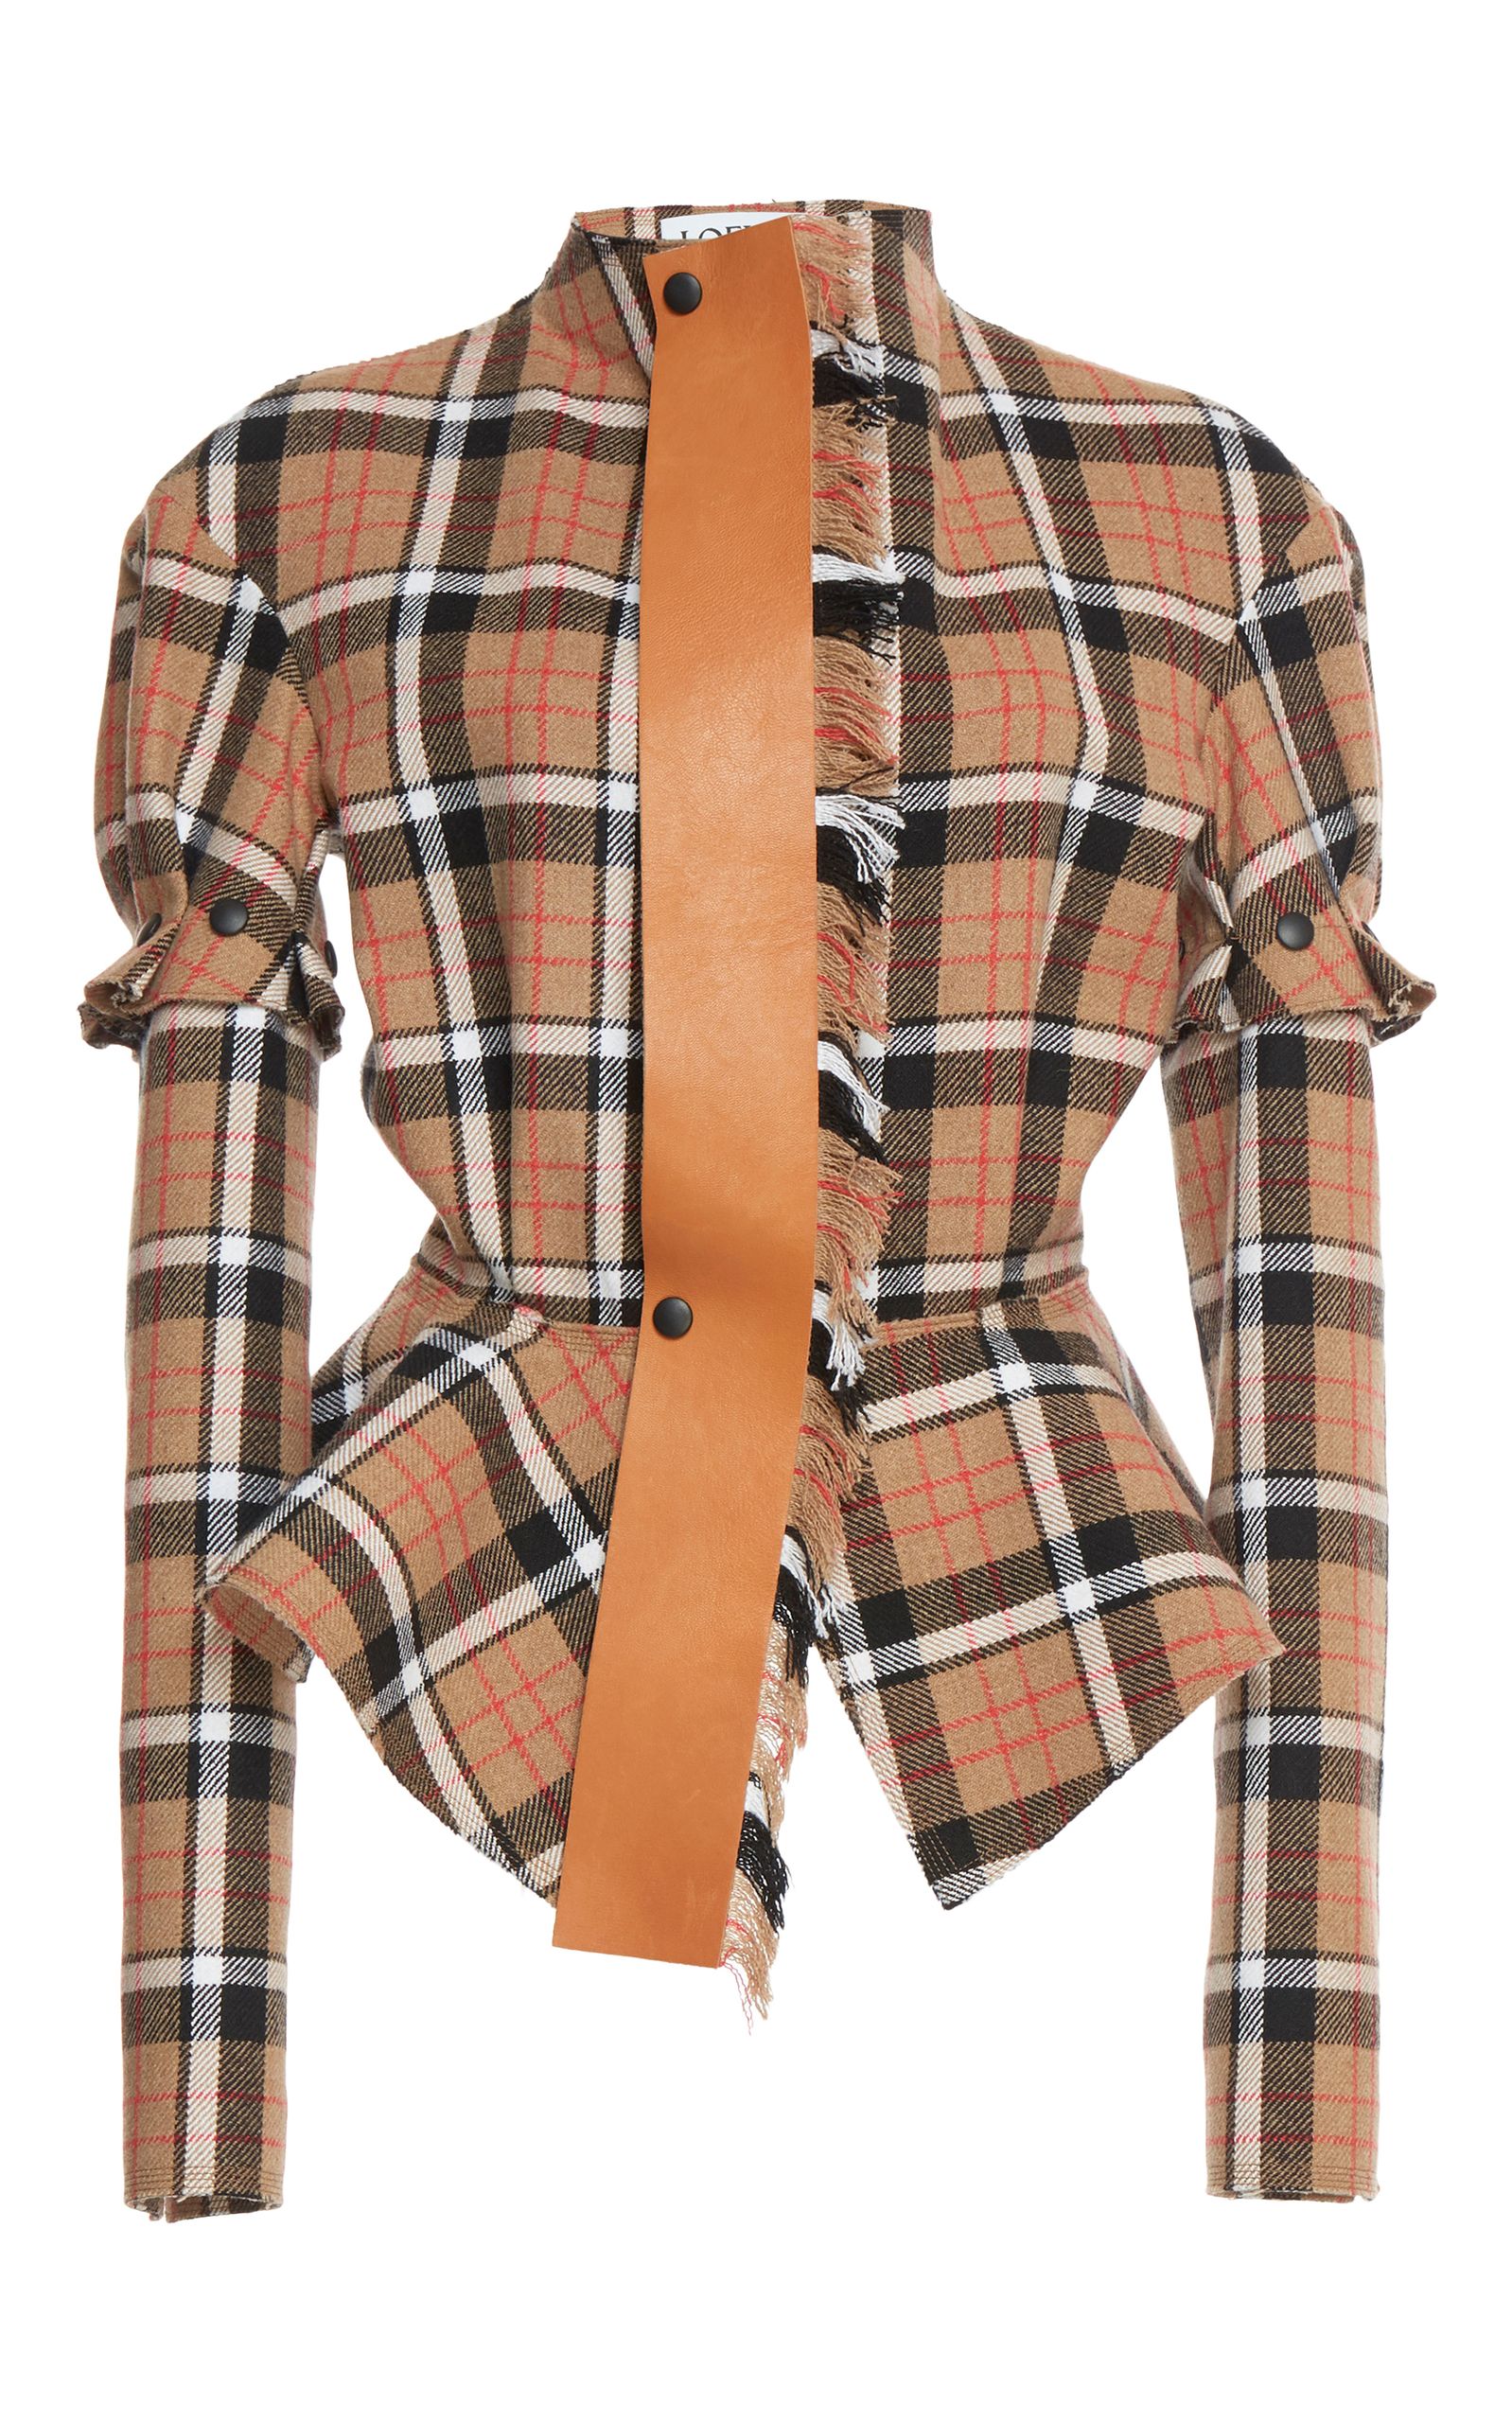 Get Your Clueless On With These Plaid Pieces